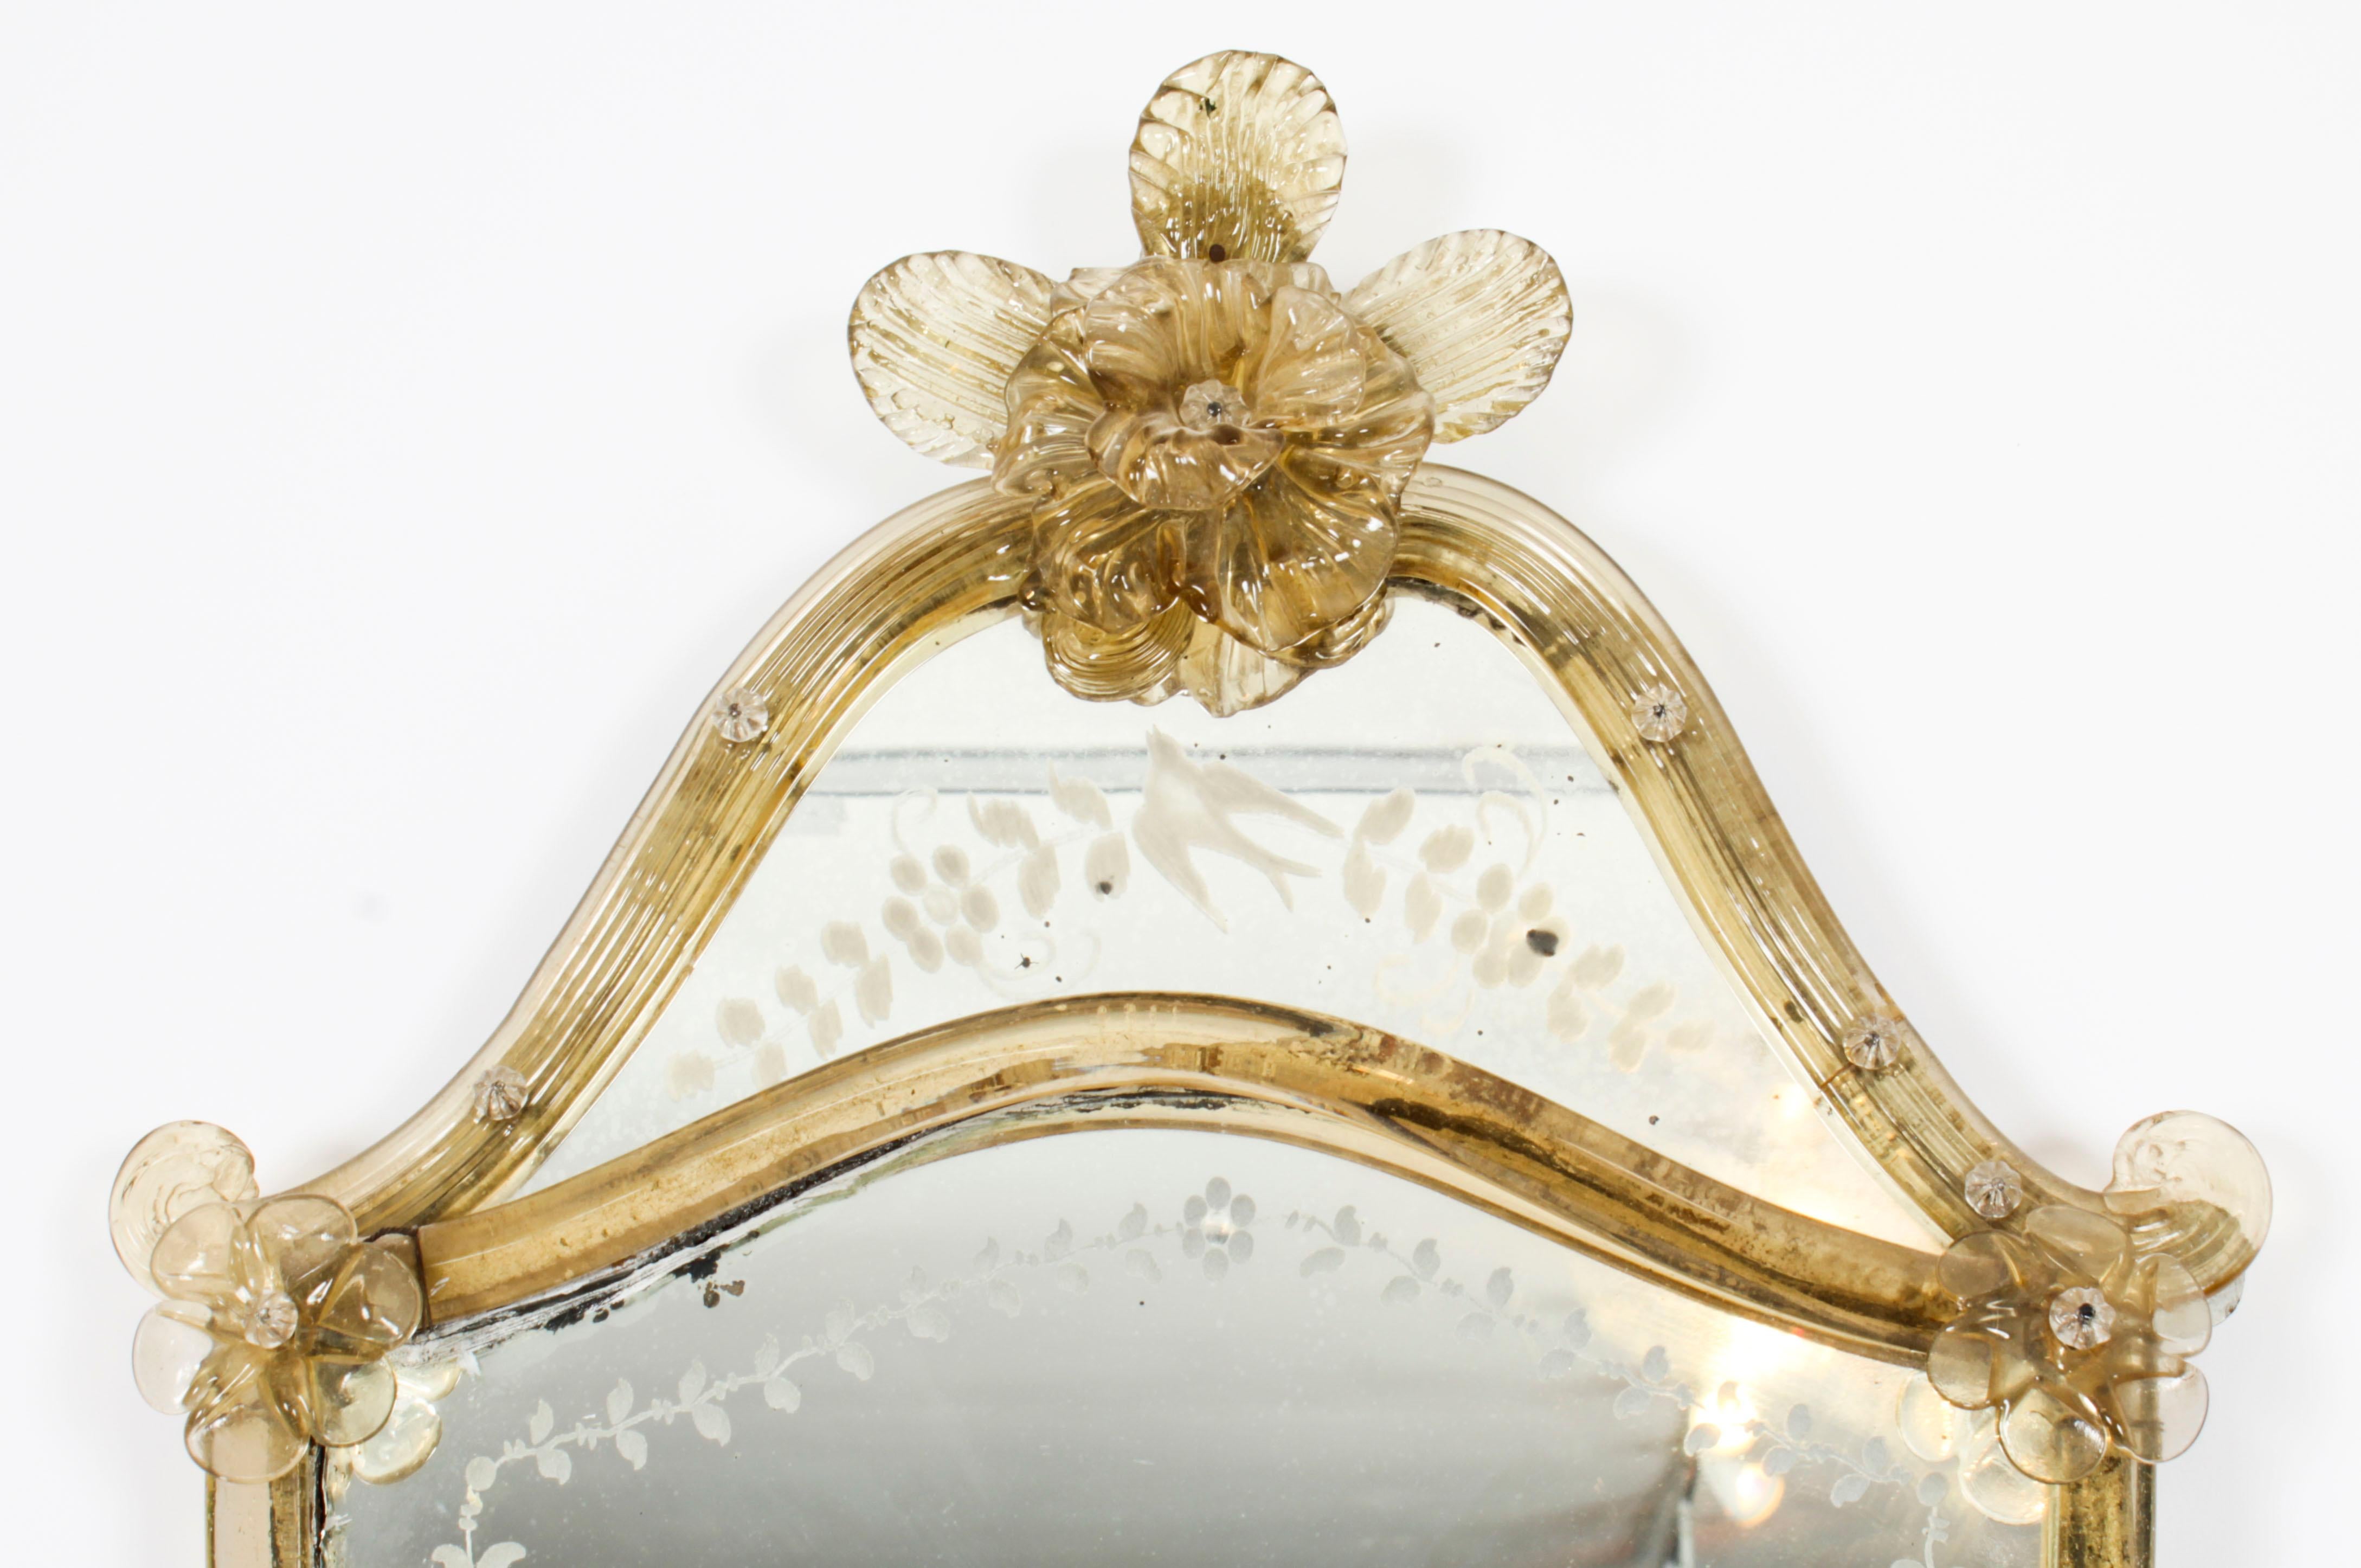 This is a delightful small Venetian glass etched mirror, circa 1880 in date.
 
This mirror has a large rose cartouche crest and is finely  shield shaped with  bead trim, rope styled borders, and flower-head accents. Wonderfully hand-etched with